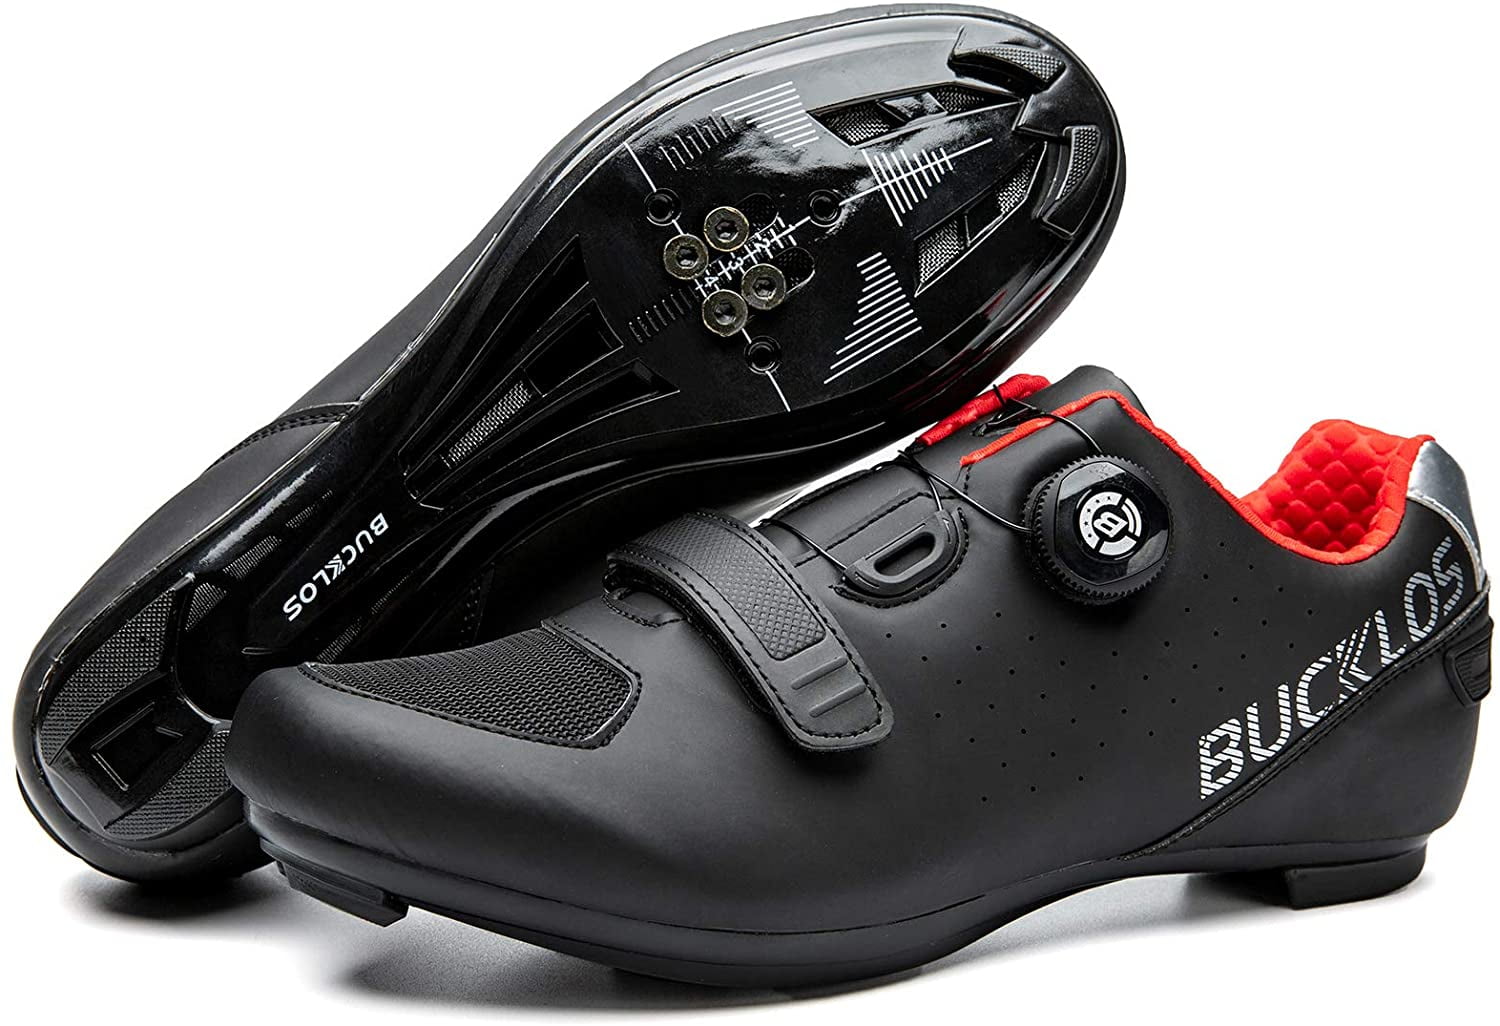 Mens Road Bike Cycling Shoes Riding Shoes with Compatible Cleat Peloton Shoe with SPD and Delta for Men Lock Pedal Bike Shoes 